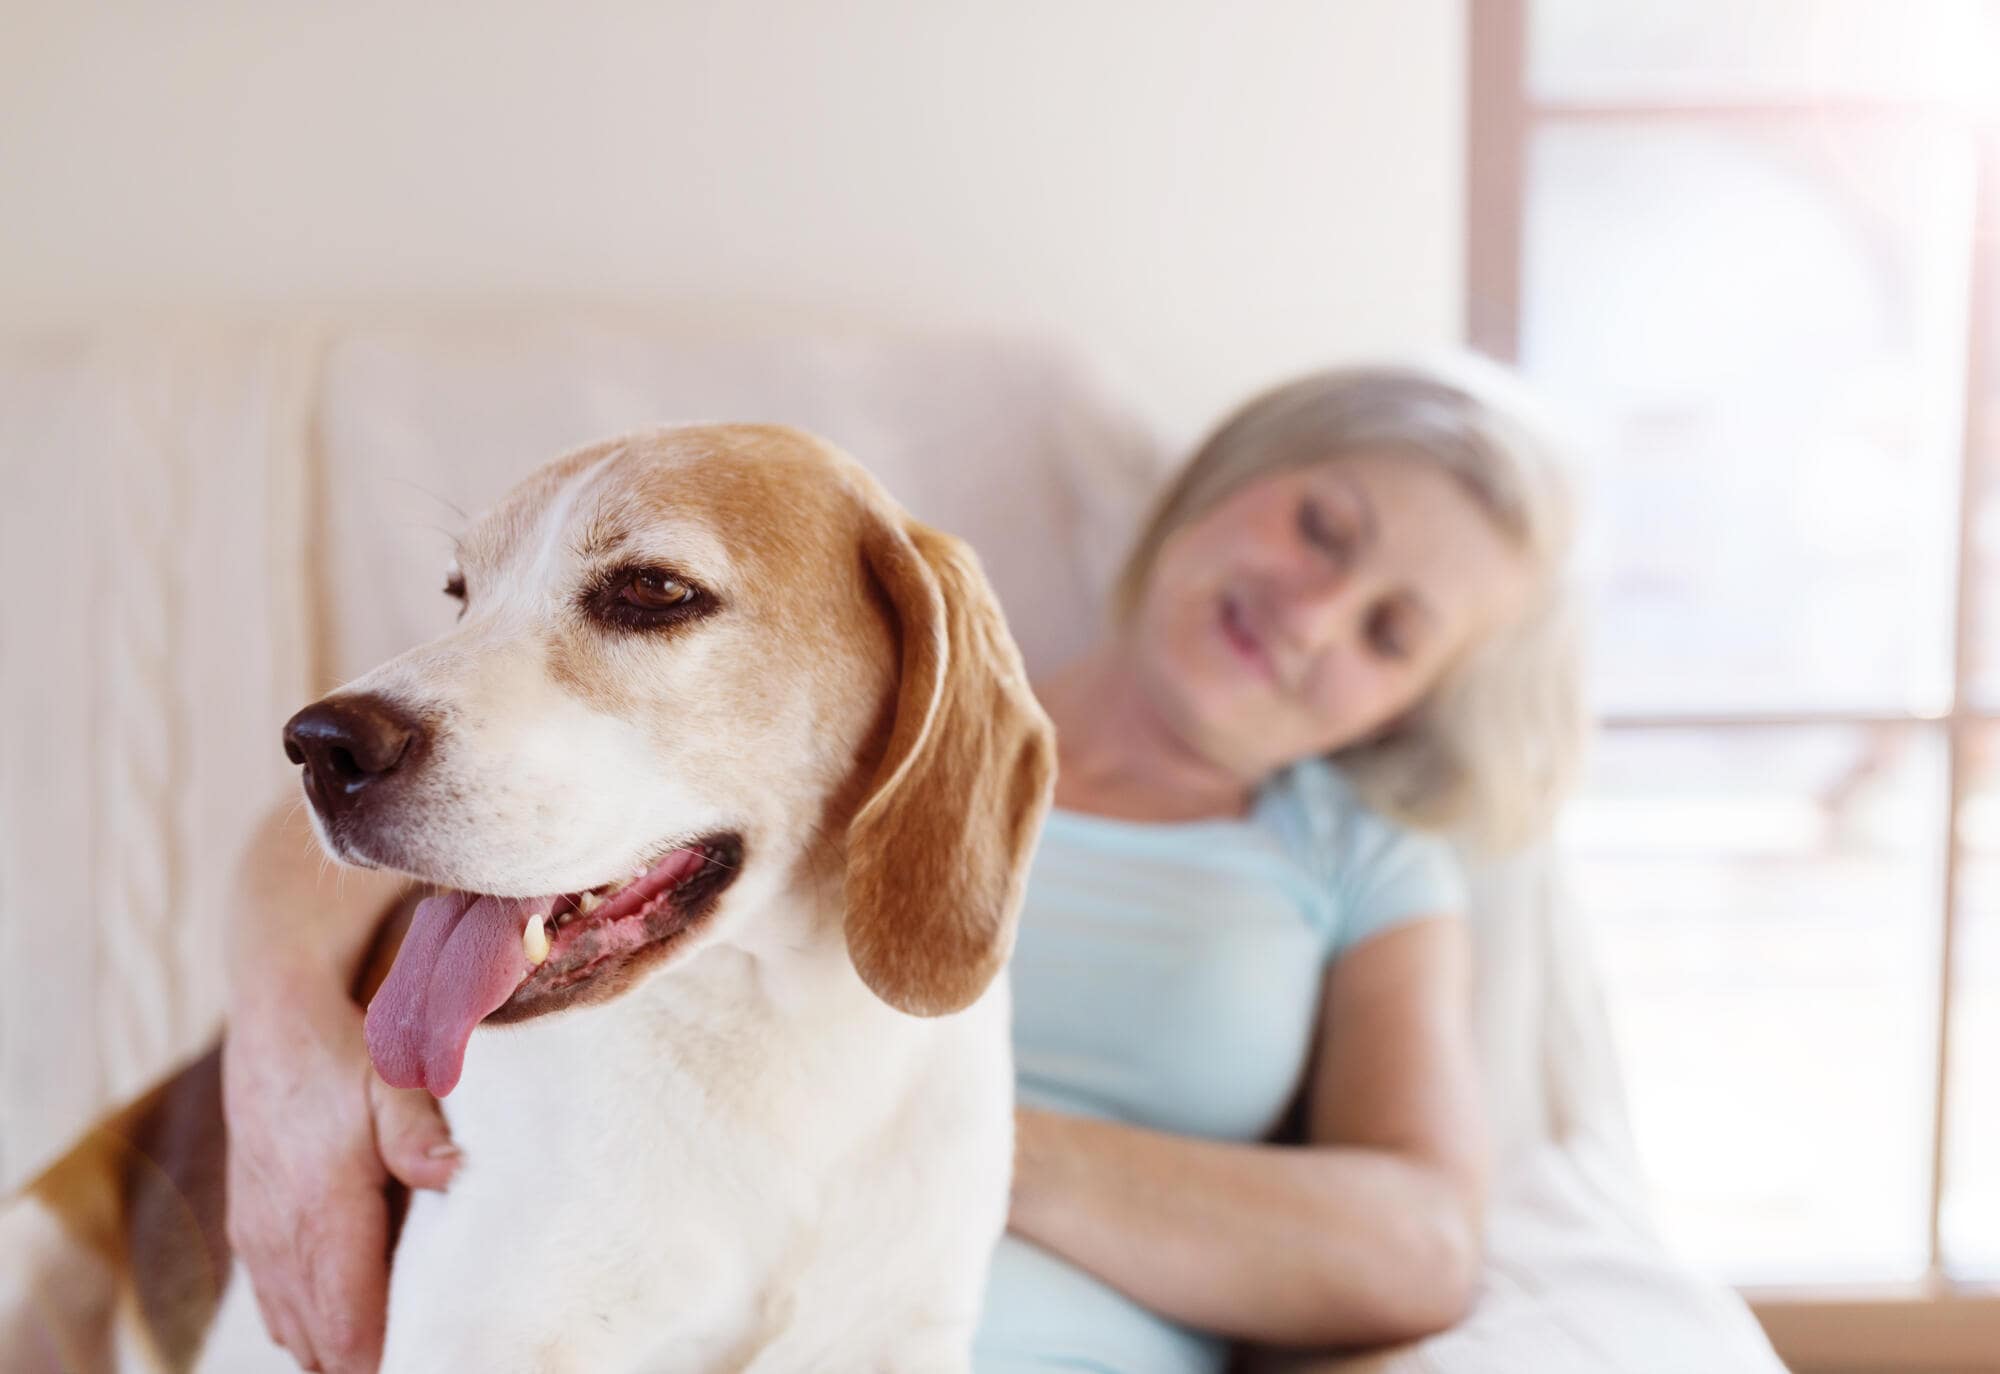 Pets in a Rental Property: Pet-Proofing Your Rental Home